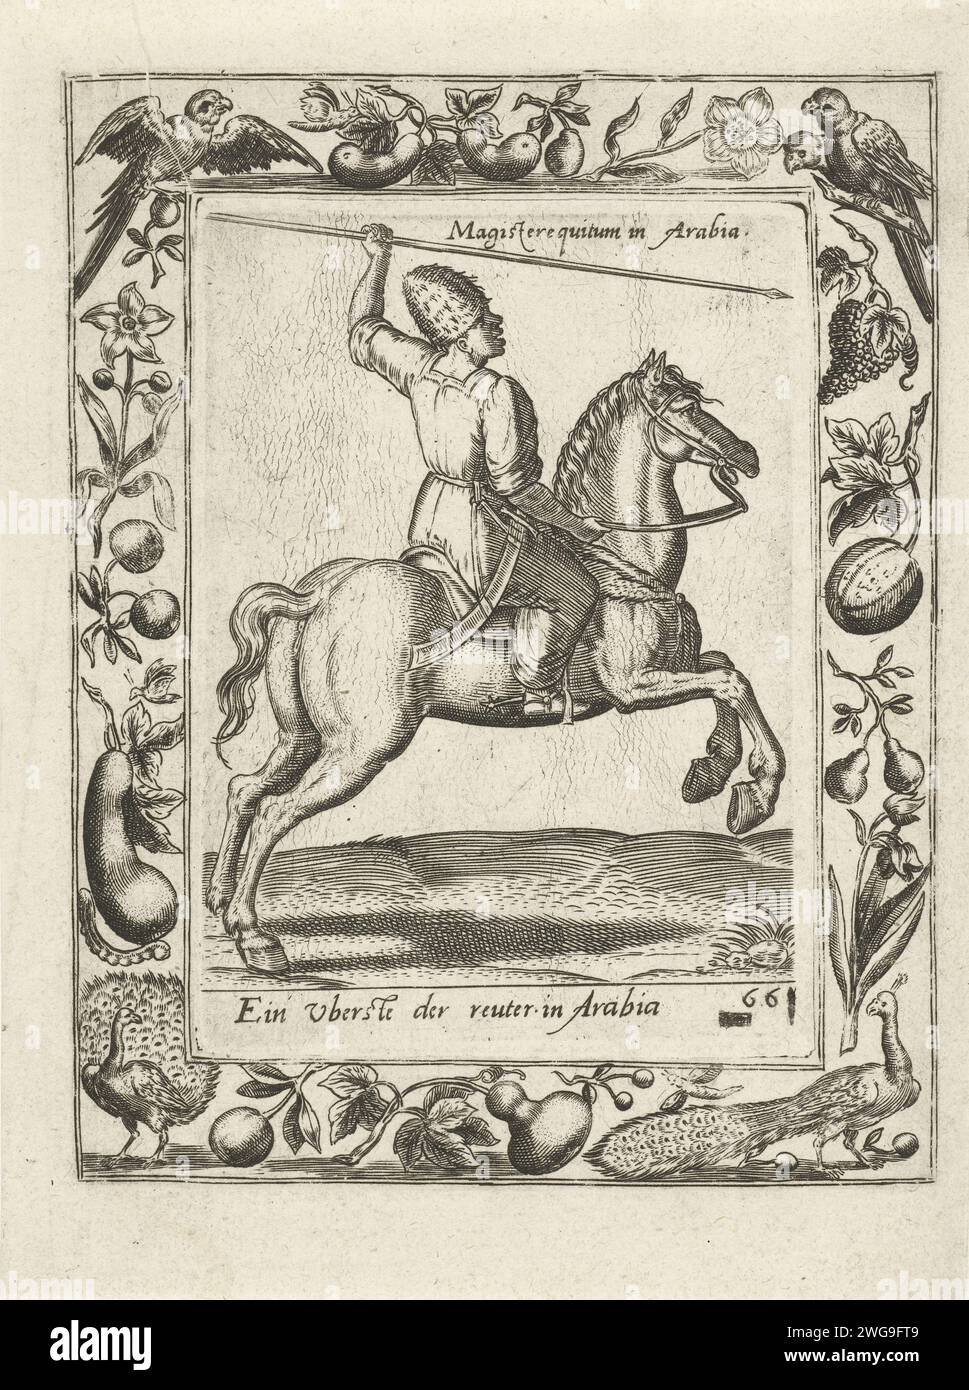 Arab chief on horseback, Anonymous, After Abraham de Bruyn, 1577  Cartouche with image of horse and rider to the right. The horse is in a gallop. The rider is an Arab officer. He has a spear in his hand. The print has a German caption and Latin inscription. Print originally from 'Equitum Descripcio ...', 1577. Cologne paper engraving warfare; military affairs (+ cavalry, horsemen). folk costume, regional costume. Asiatic races and peoples (with NAME). (military) uniforms. officer Stock Photo